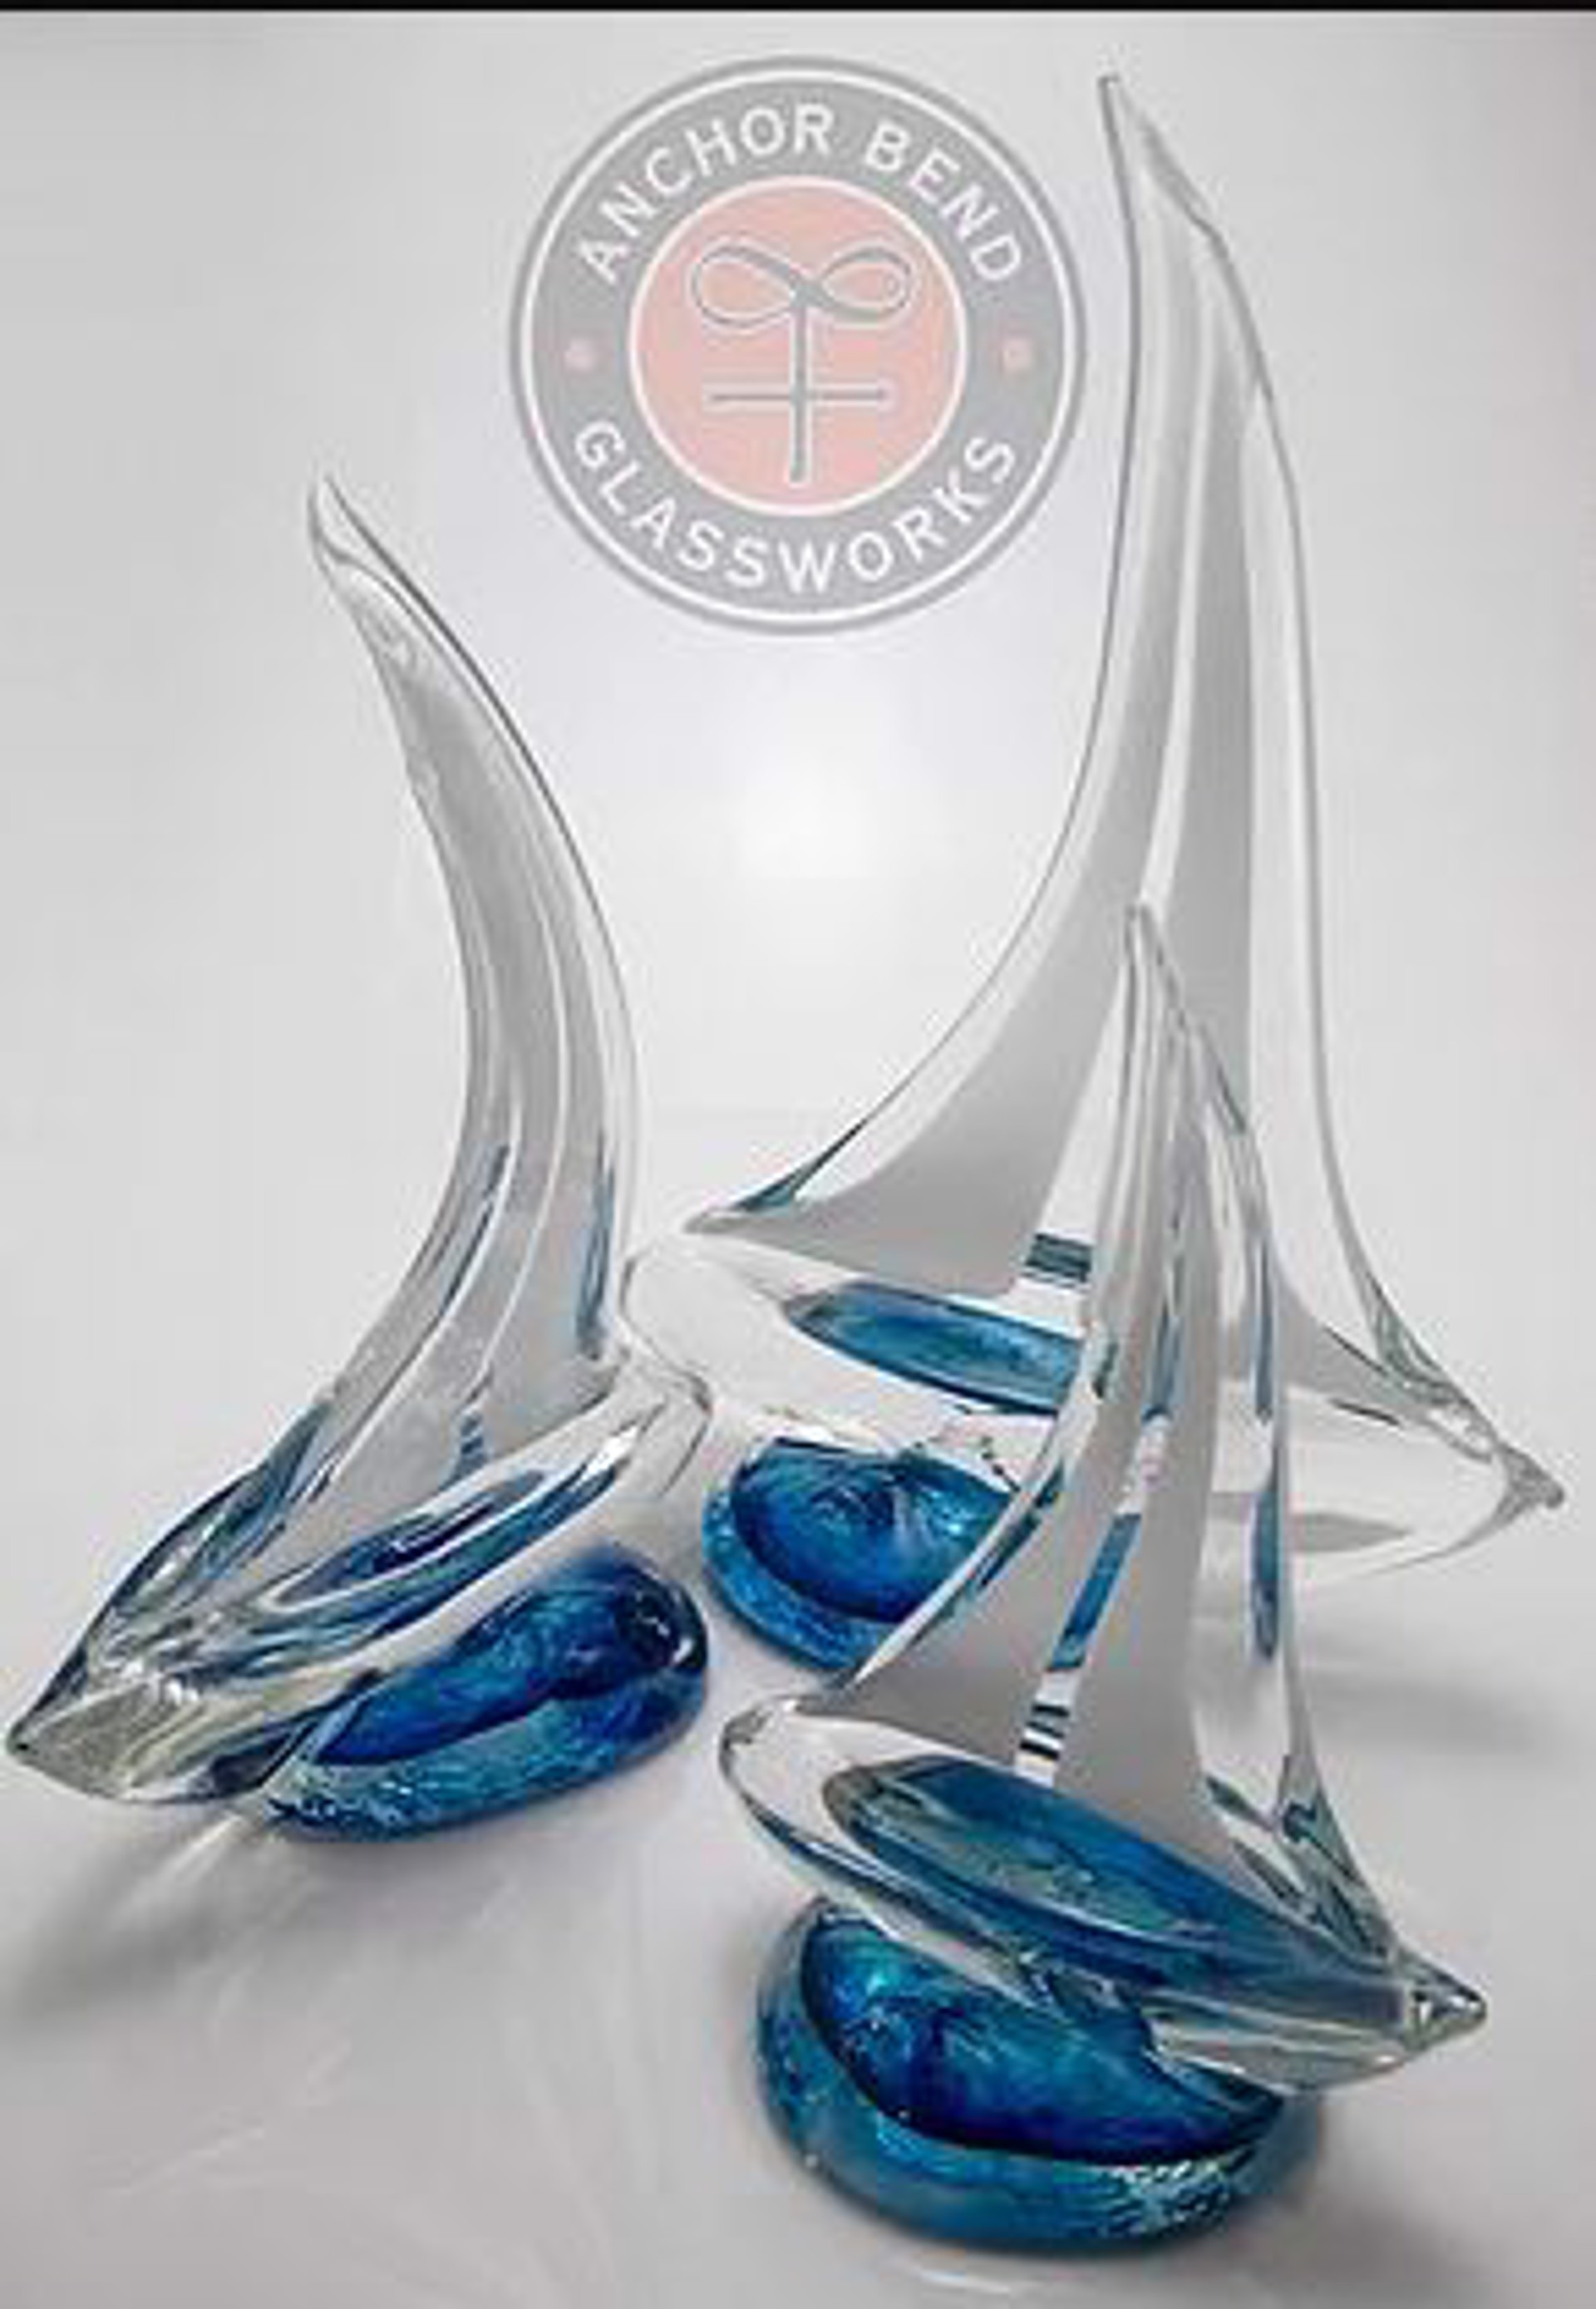 Large Blown Glass Sail Boat by Anchor Bend Glassworks